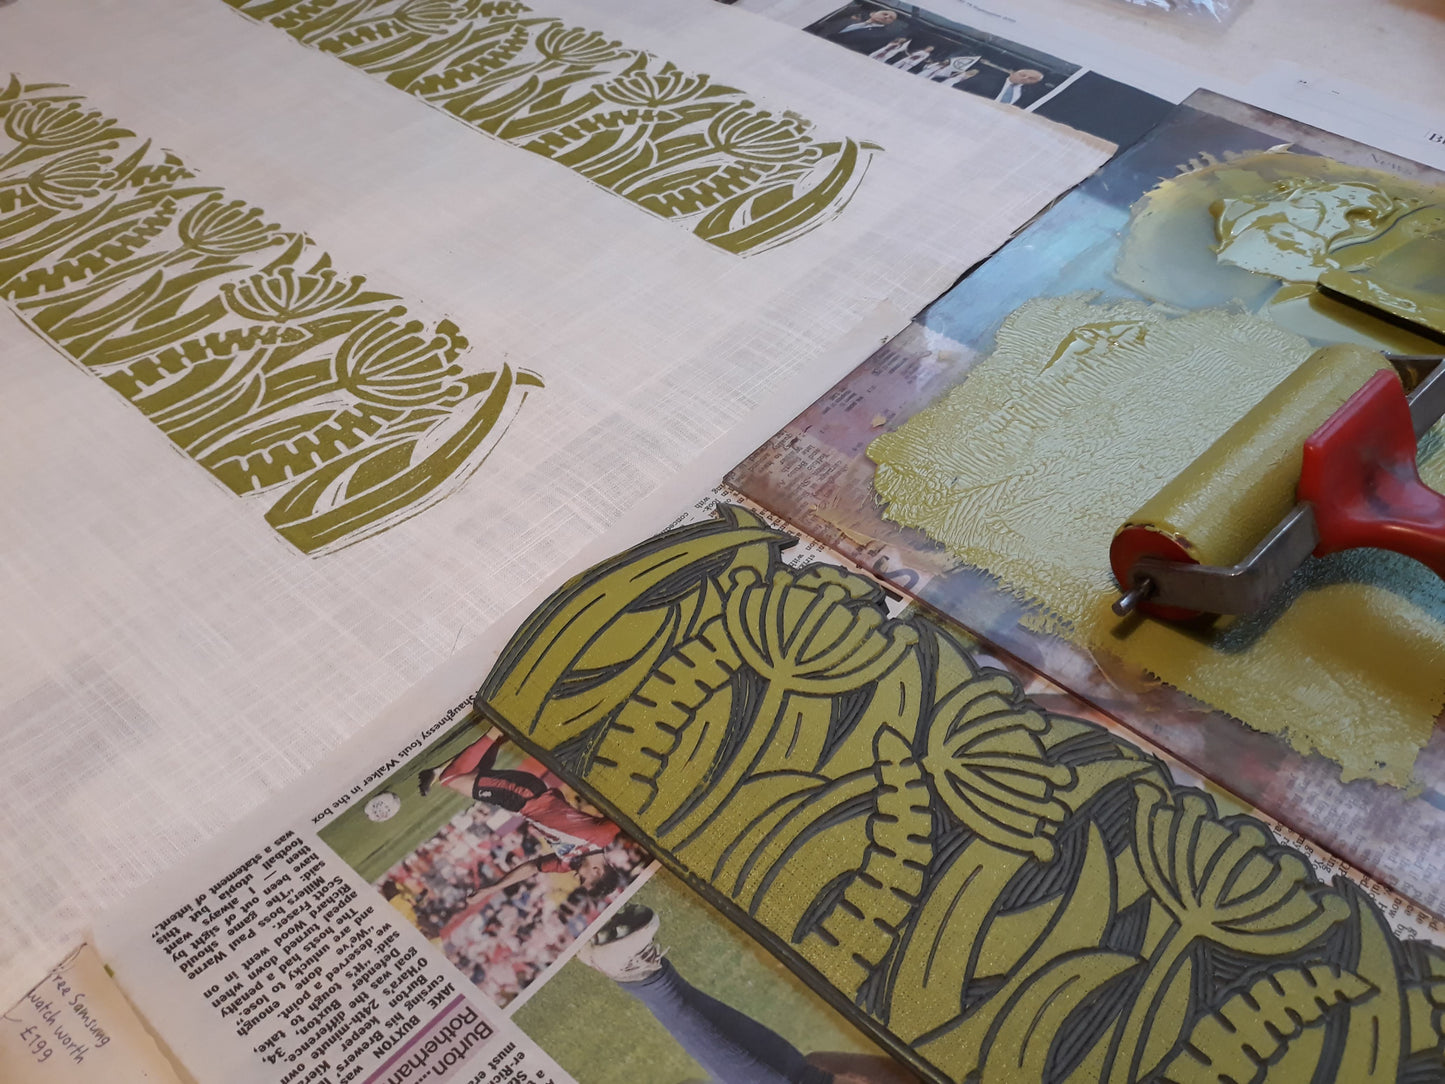 17/08/24  Lino Printing onto Fabric  Workshop with Louise Nichols *Suitable for Beginners  - 10am to 4pm